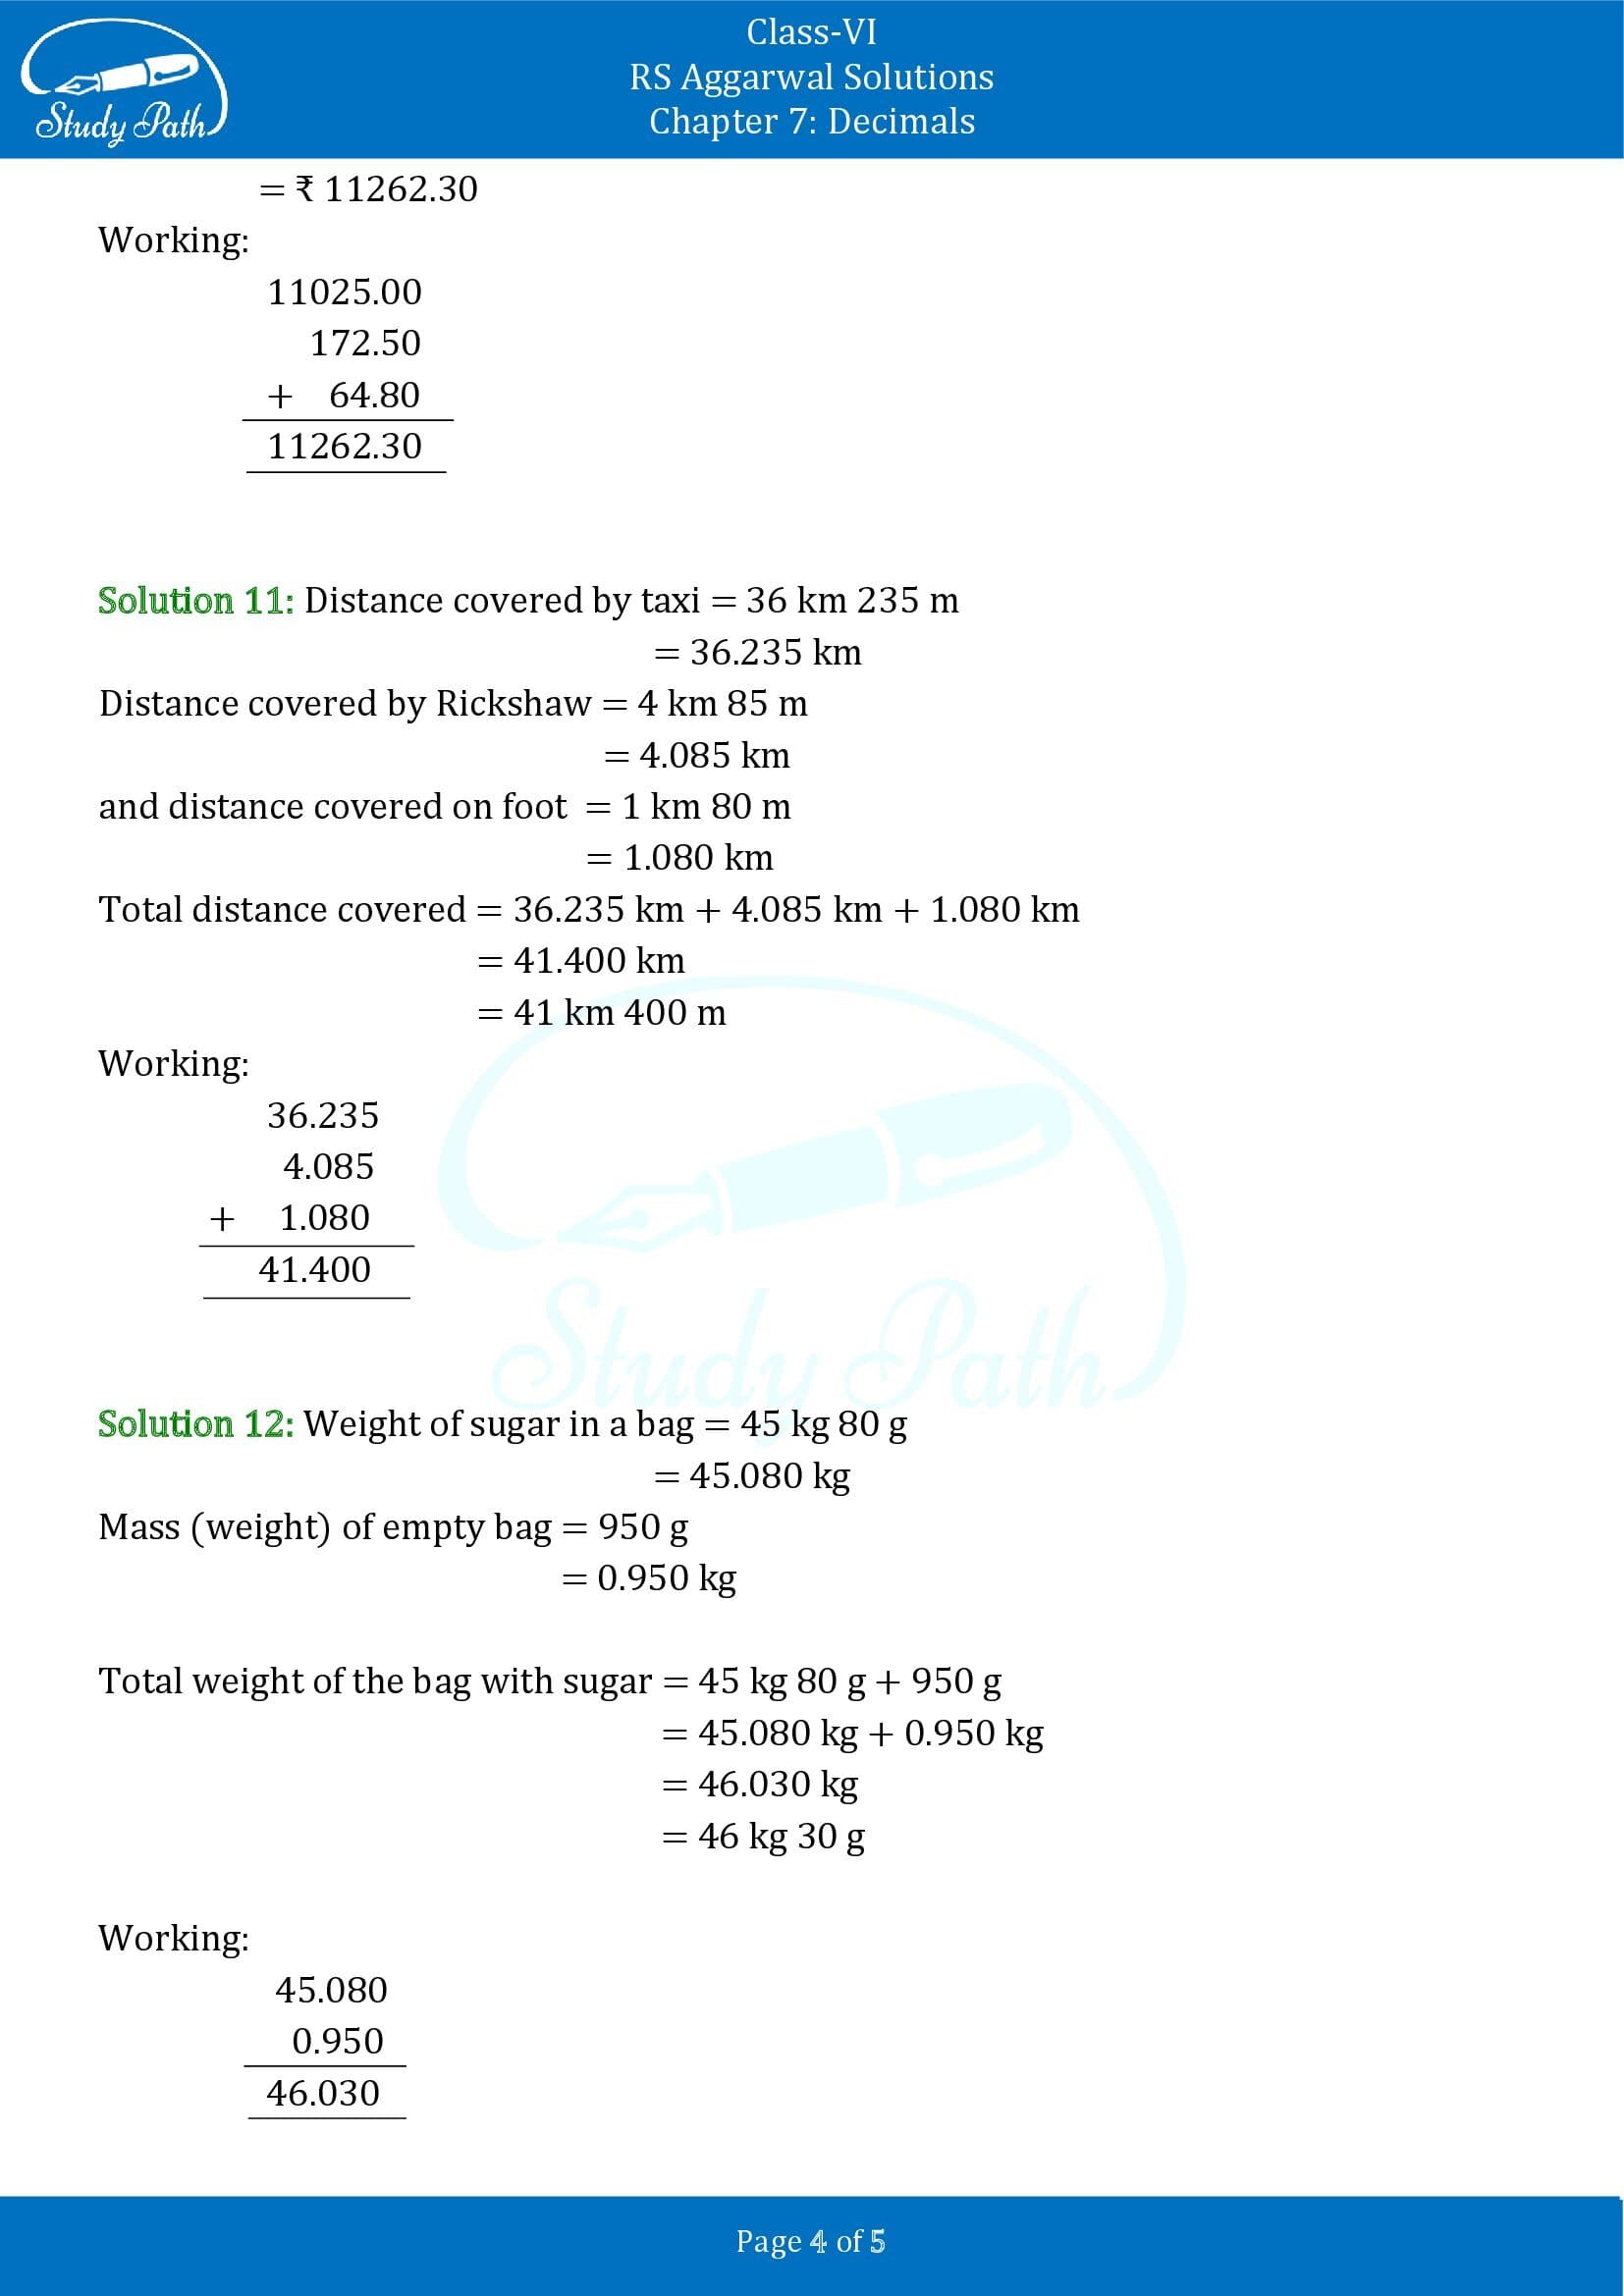 RS Aggarwal Solutions Class 6 Chapter 7 Decimals Exercise 7C 0004